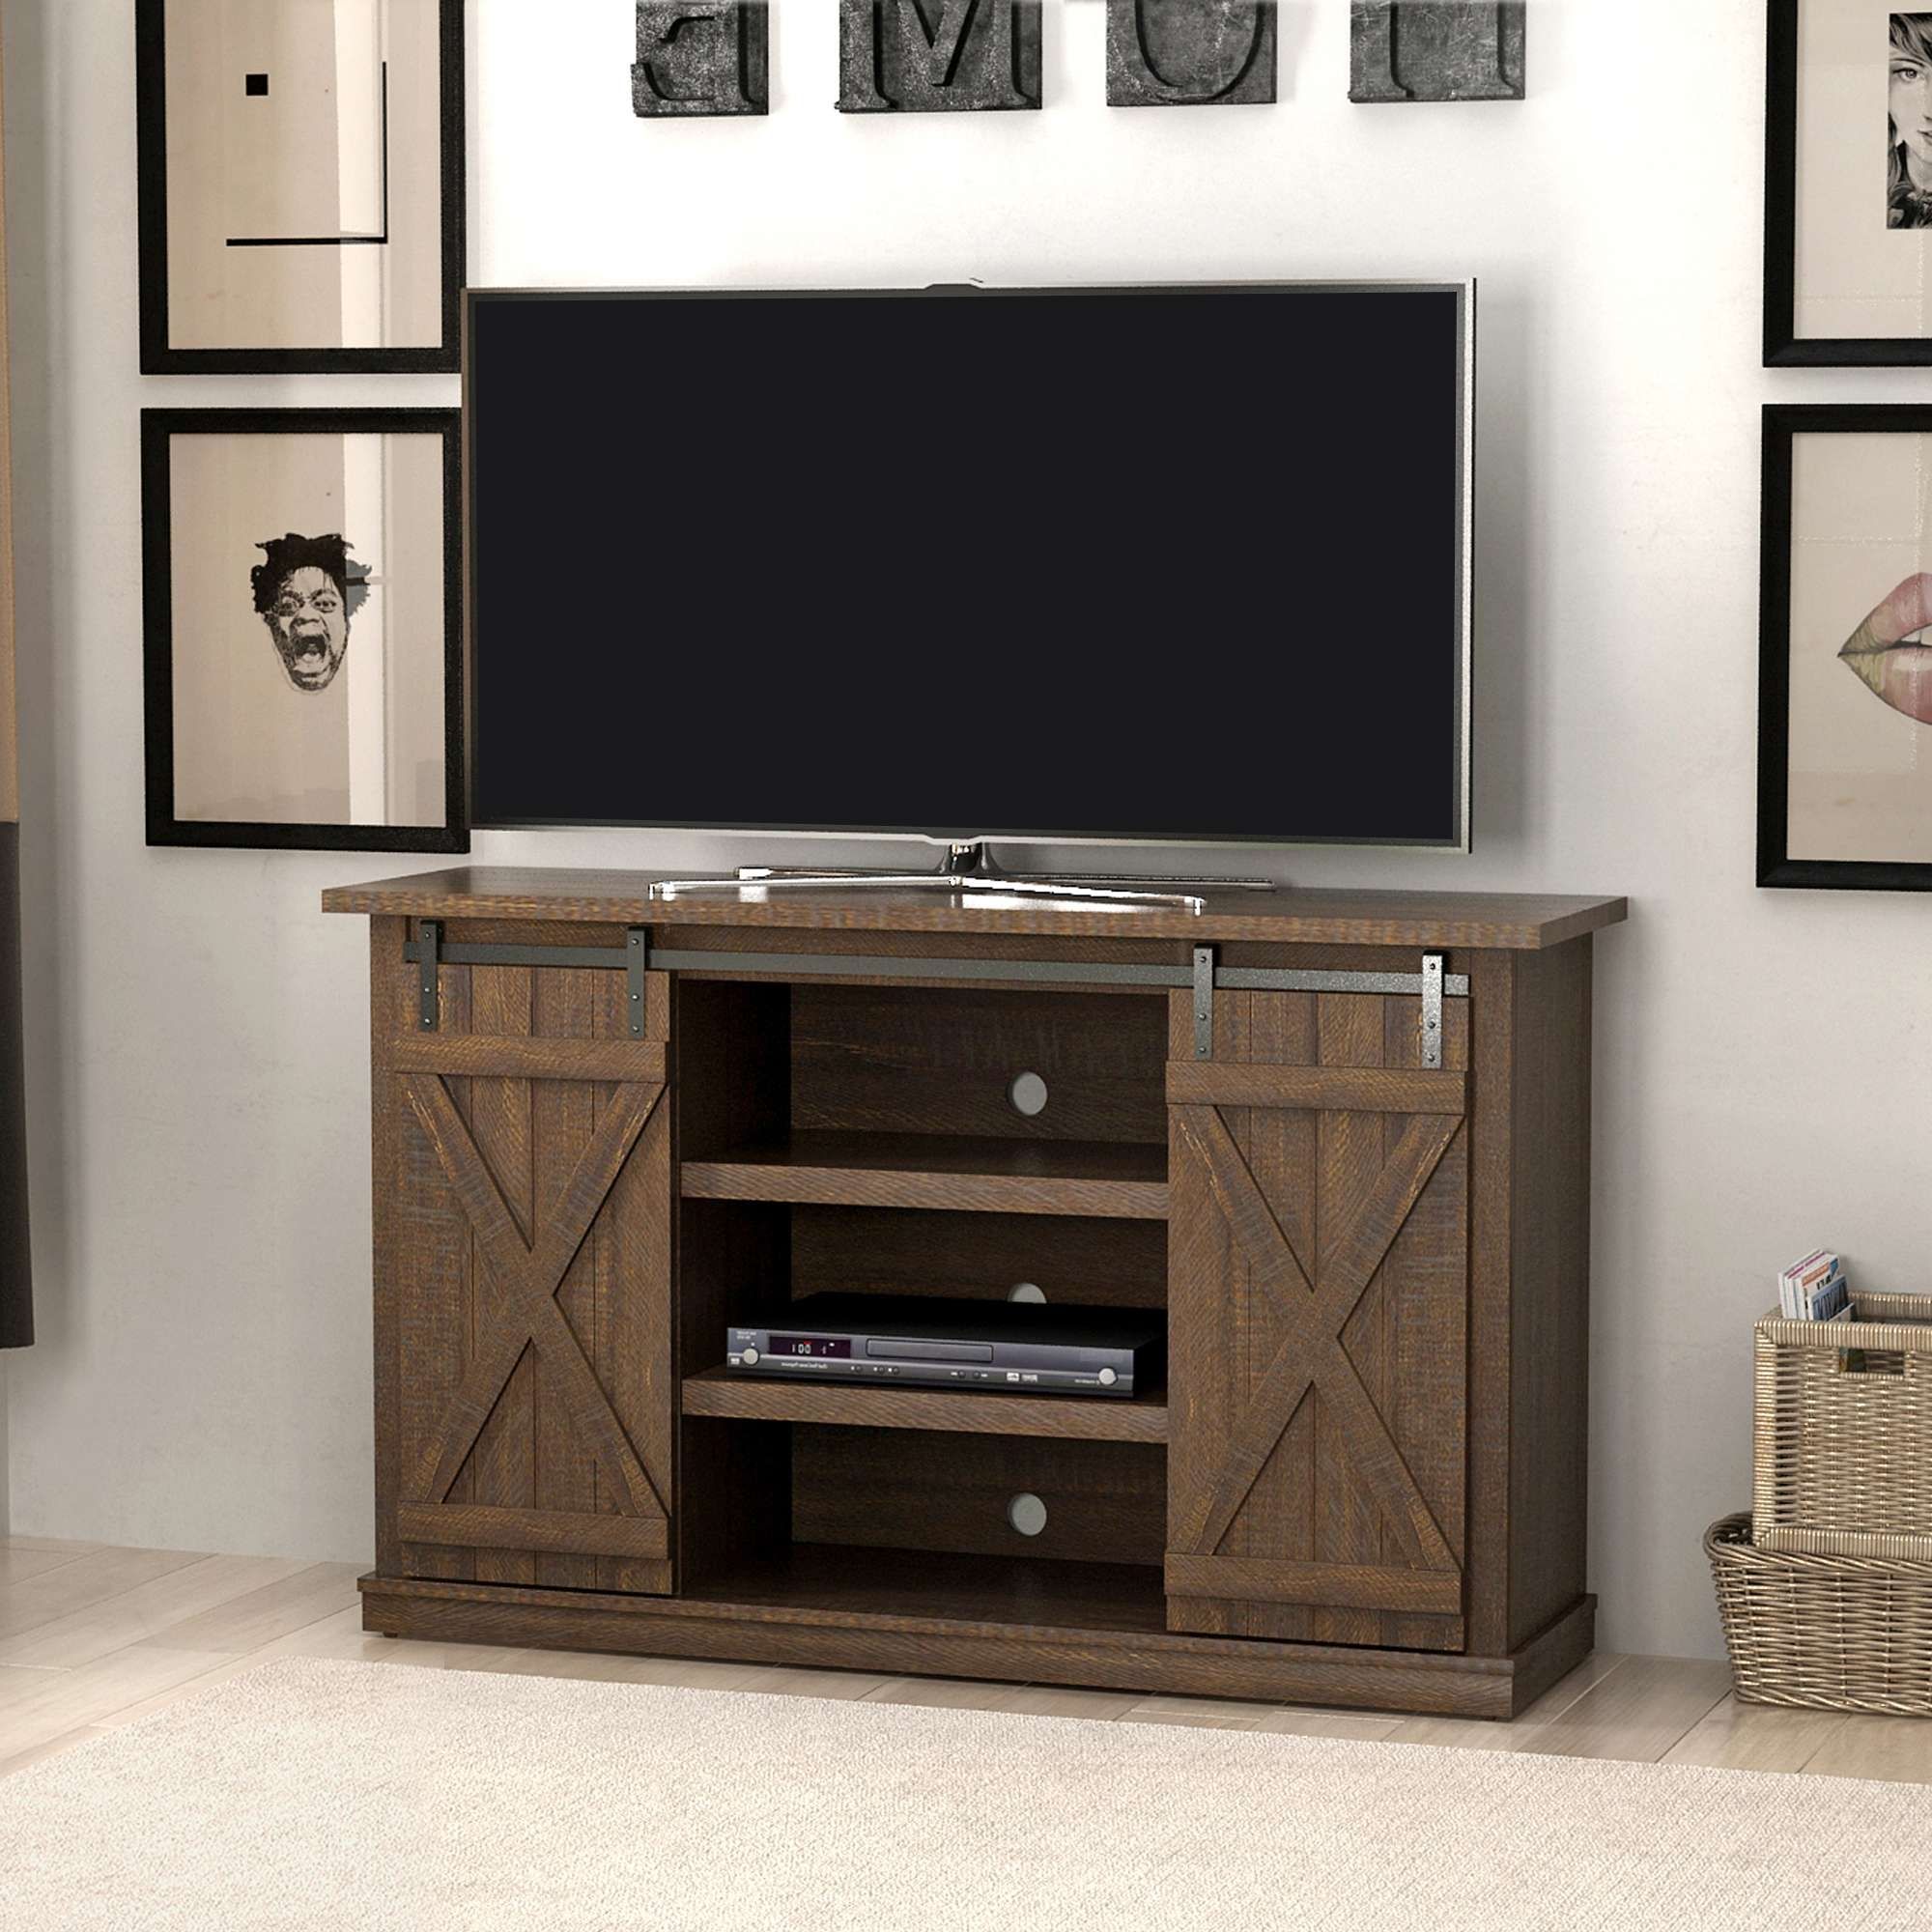 Tv Stands – Walmart For 24 Inch Wide Tv Stands (Gallery 1 of 15)